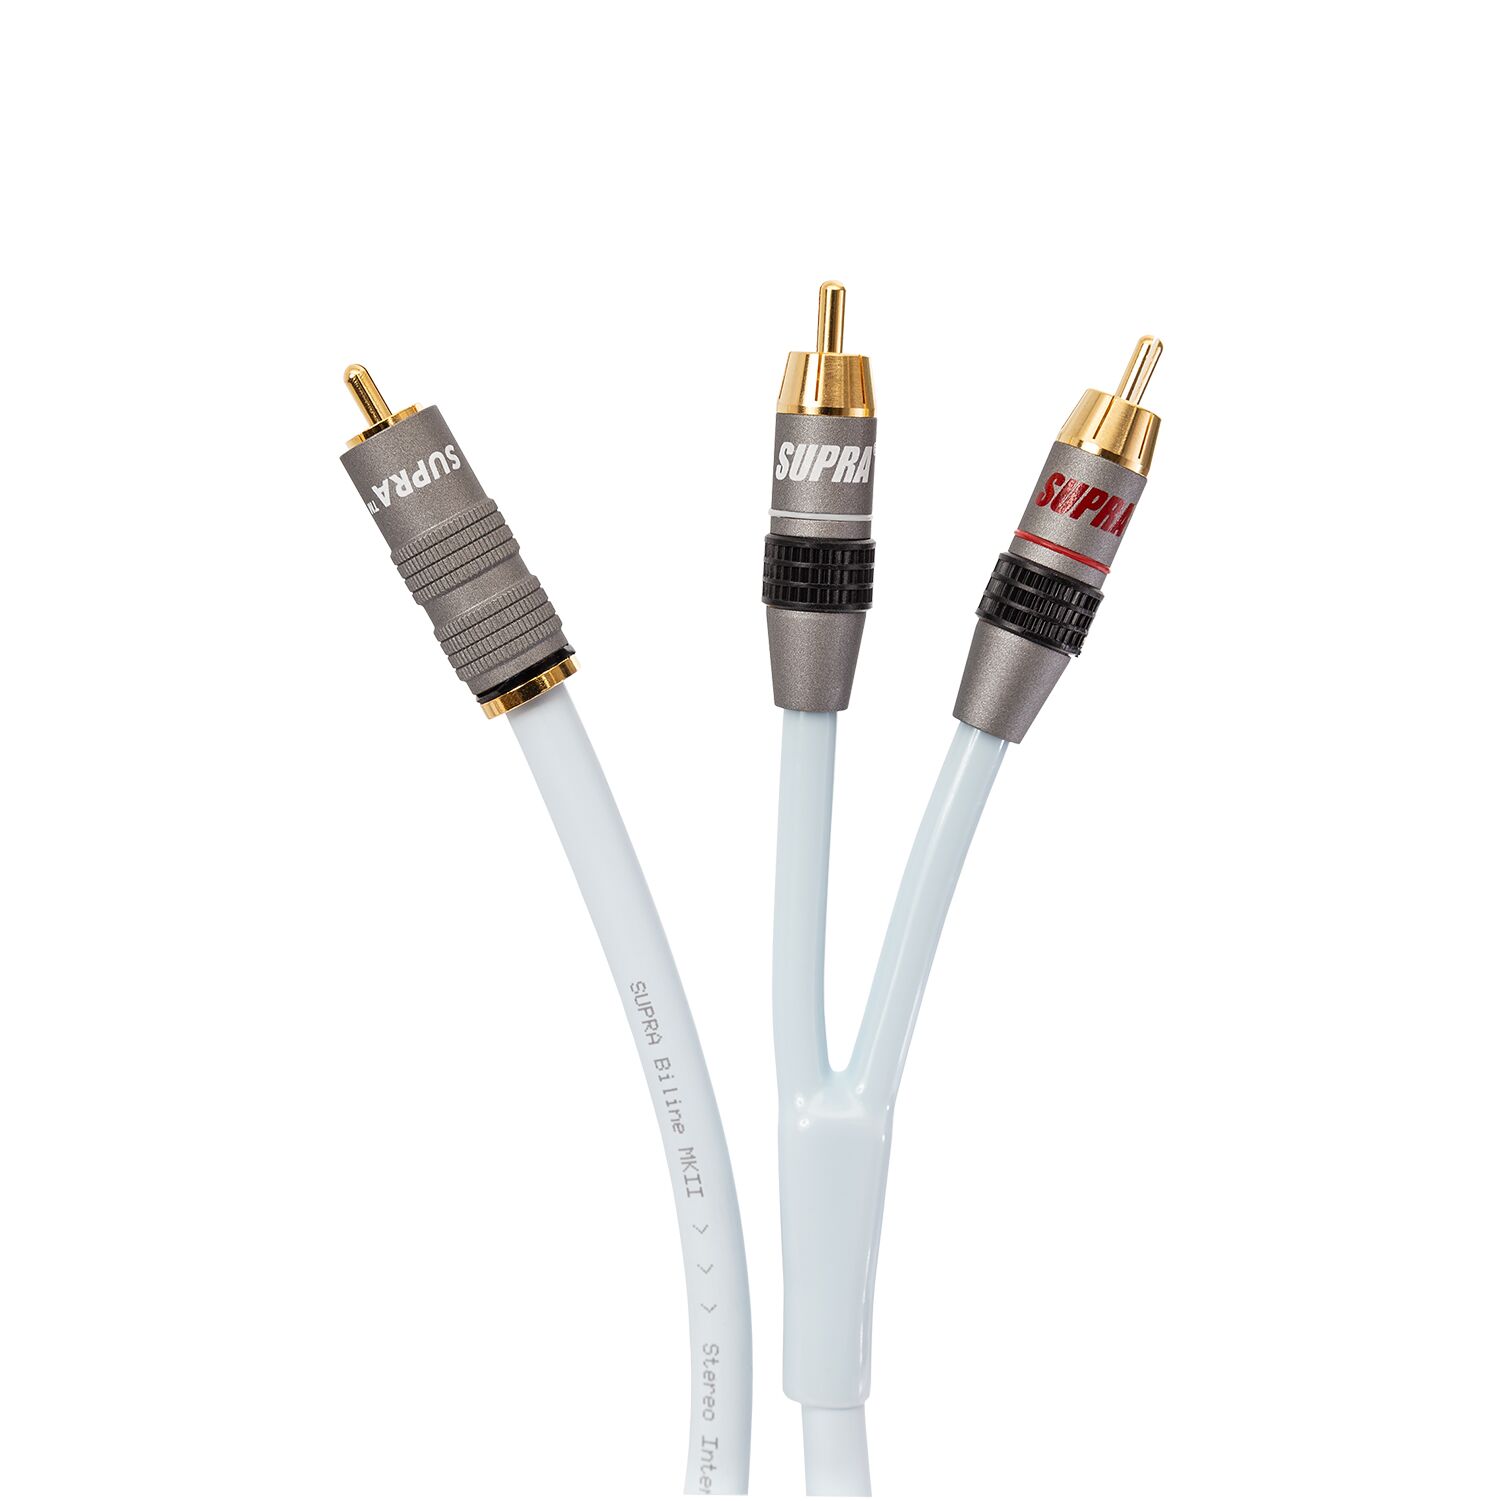 Subwoofer cable